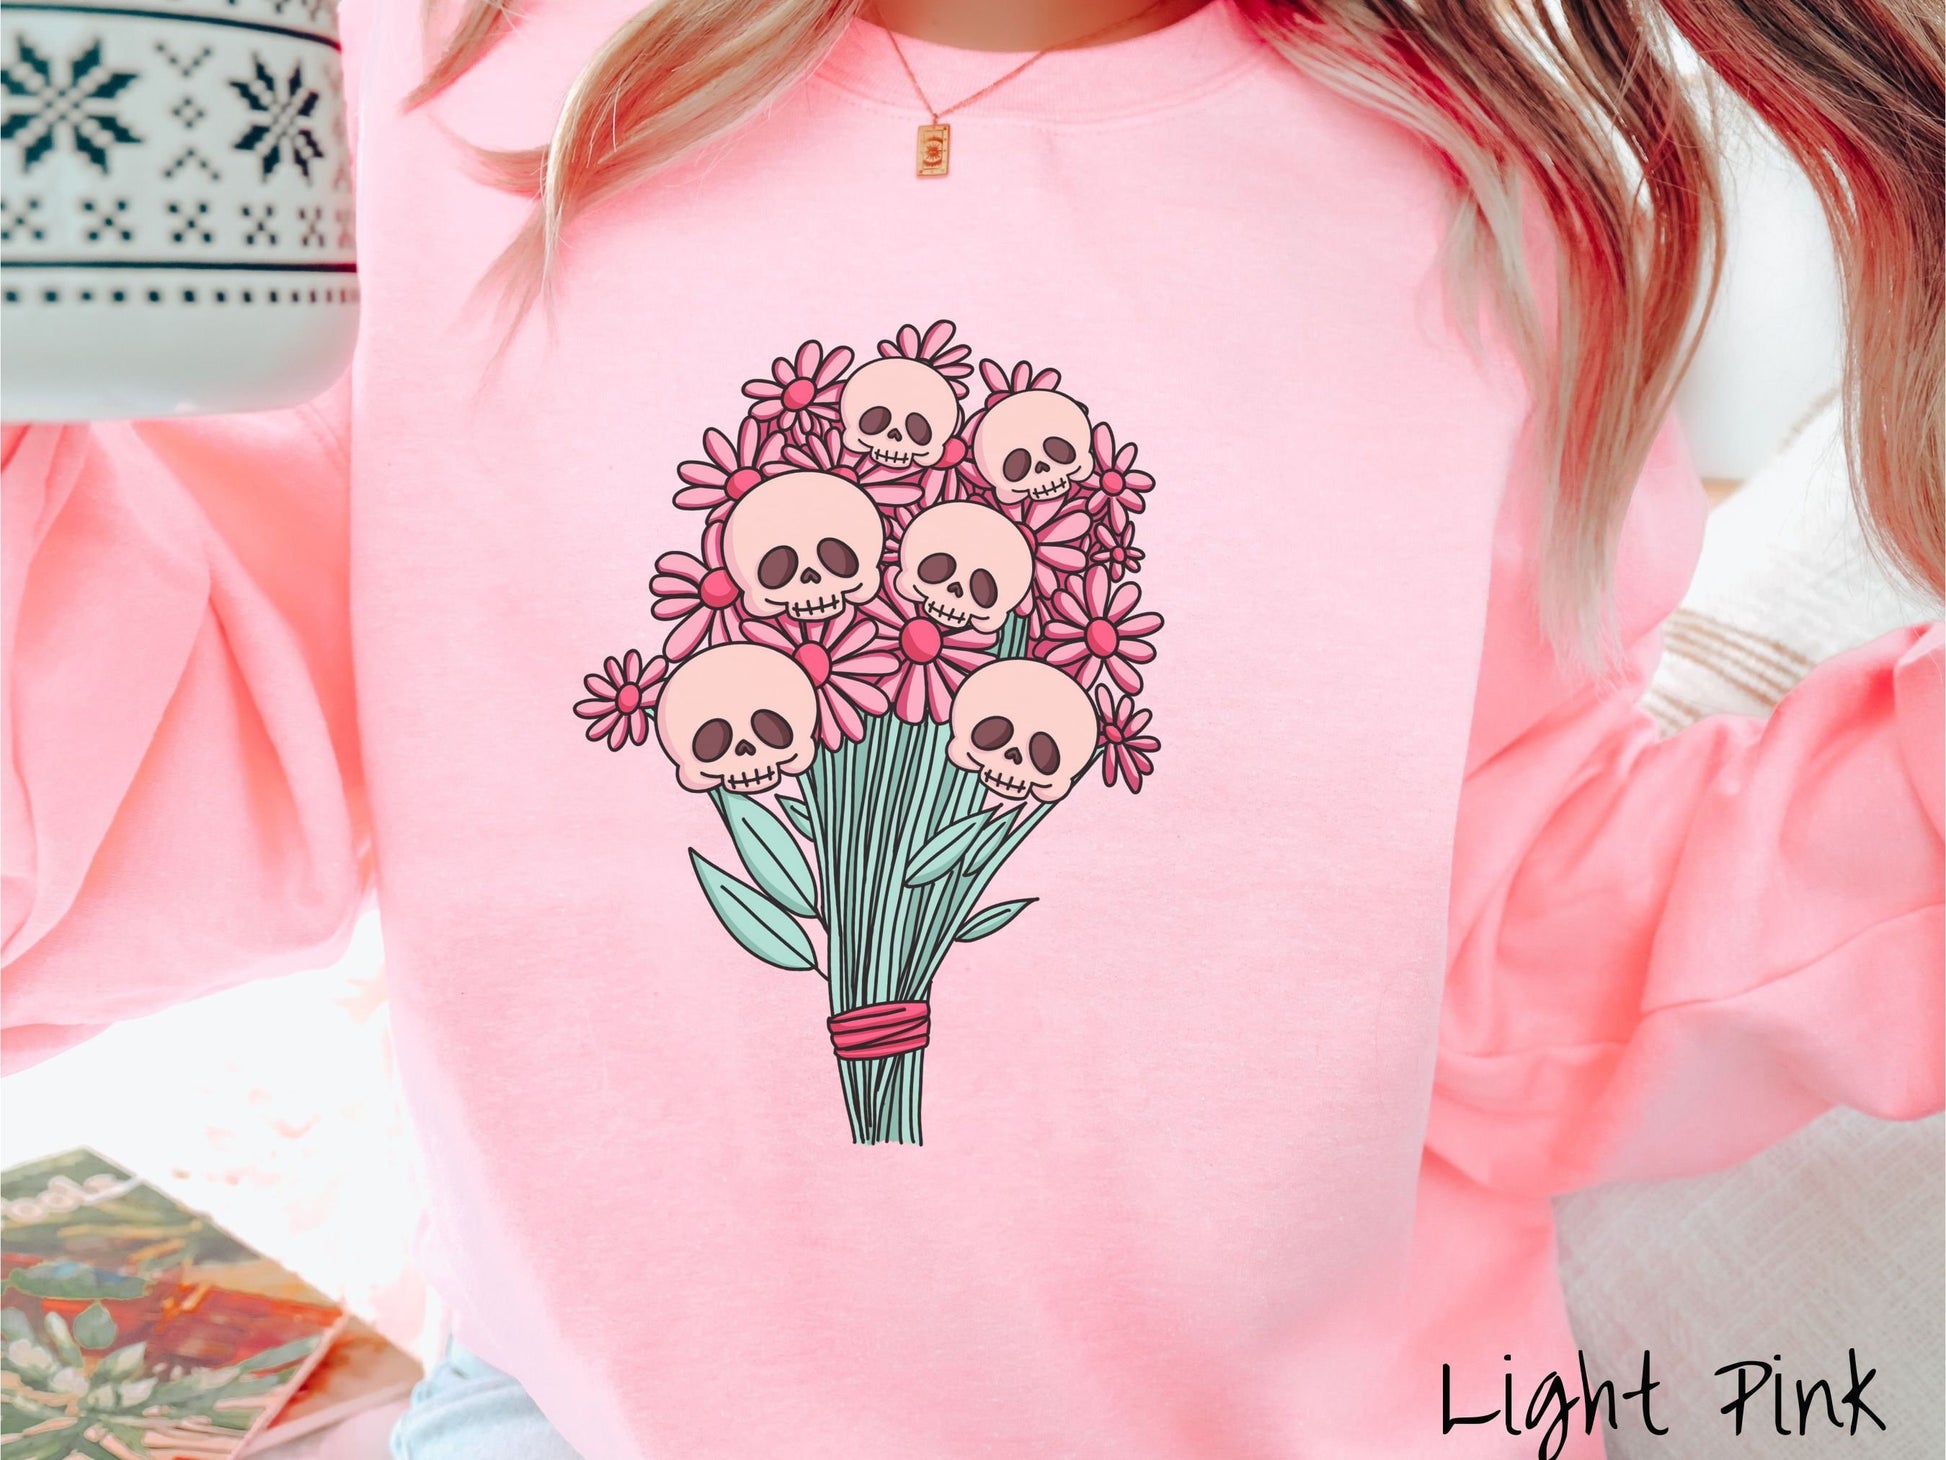 A woman wearing a cute light pink colored sweatshirt with a spooky flower bouquet with skull heads as the flowers among pink colored flowers.